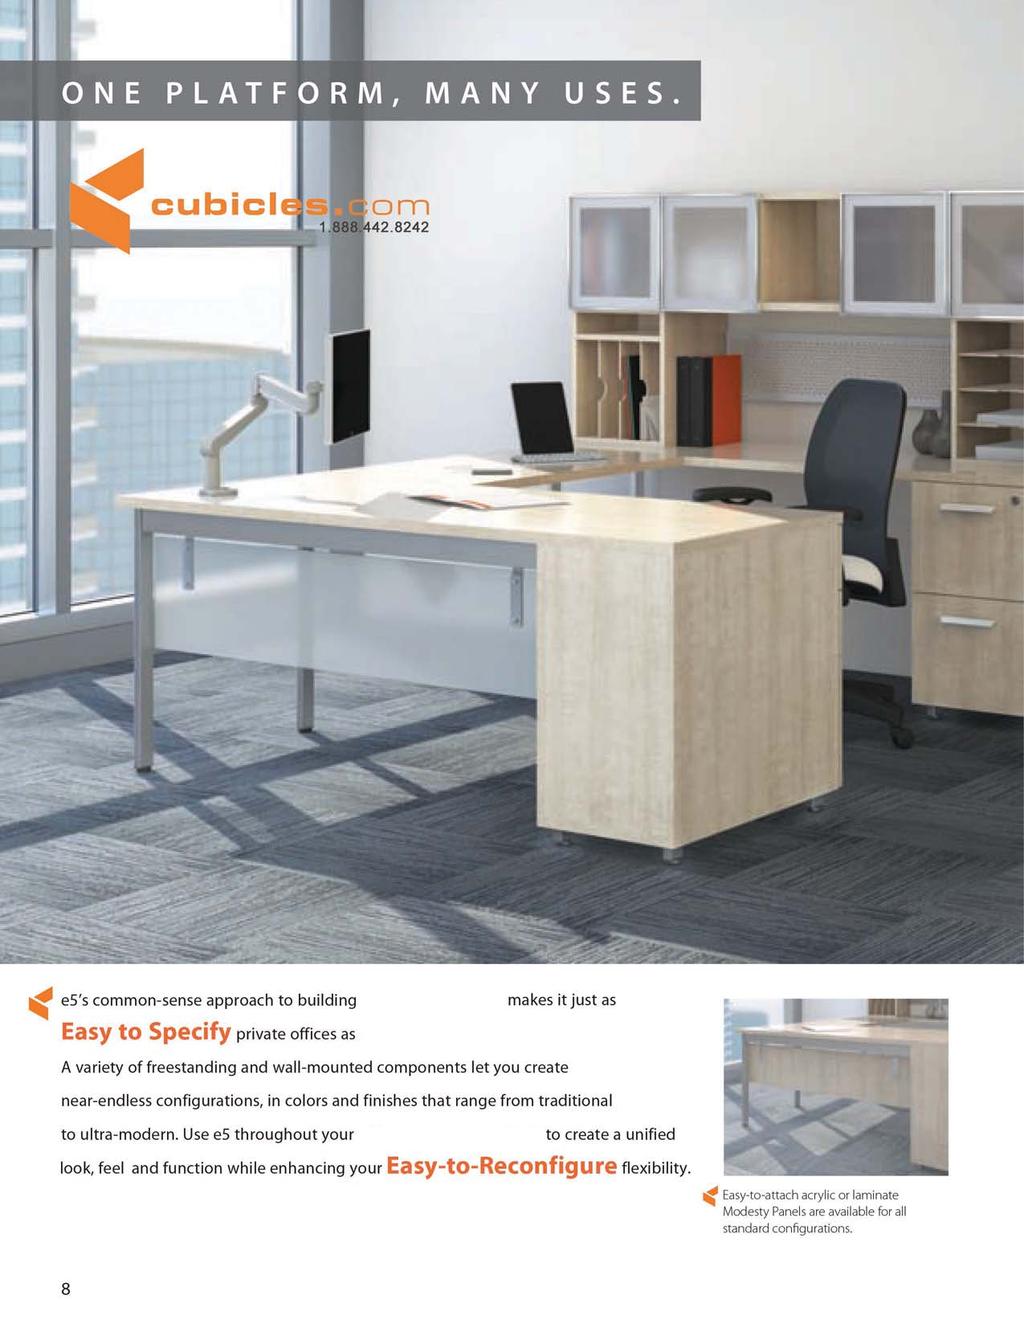 cubicl.;: es's common-sense approach to building office work stations ma kes it just as Easy to Specify private offices as a collaborative workspace.